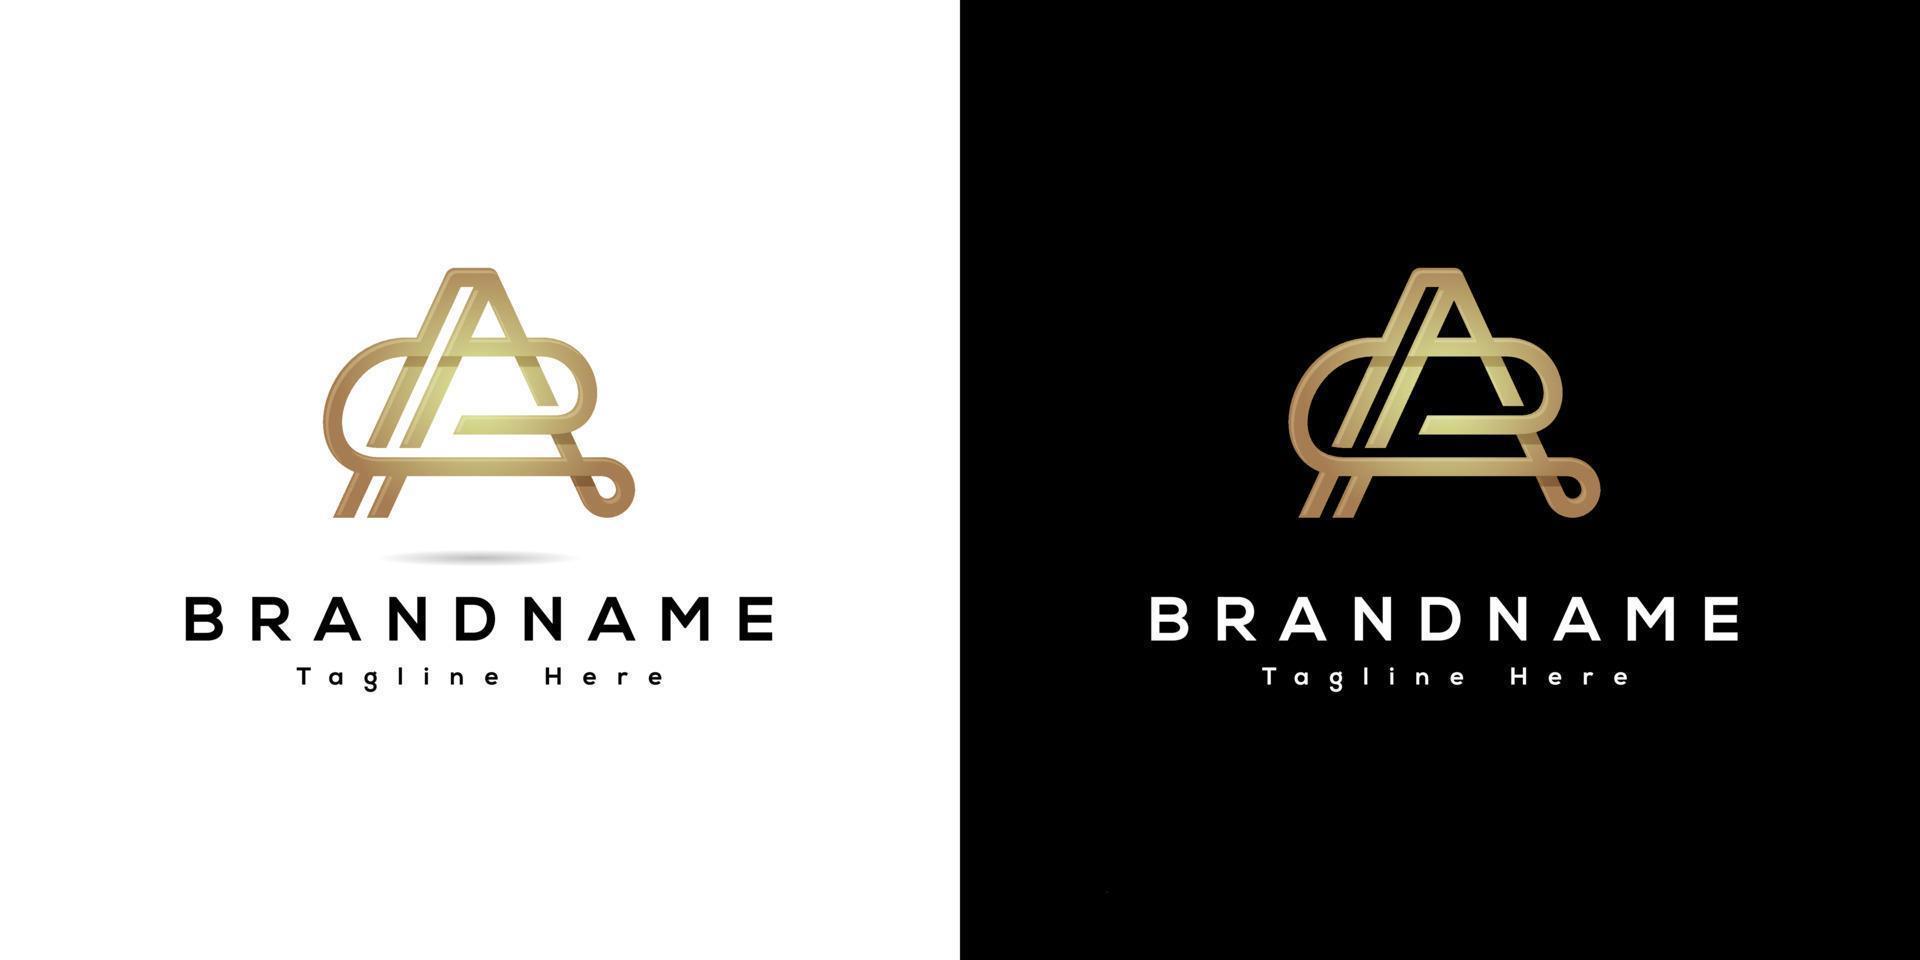 Creative golden line of letter A sign type classic logo design. Premium exclusive quality logo vector template